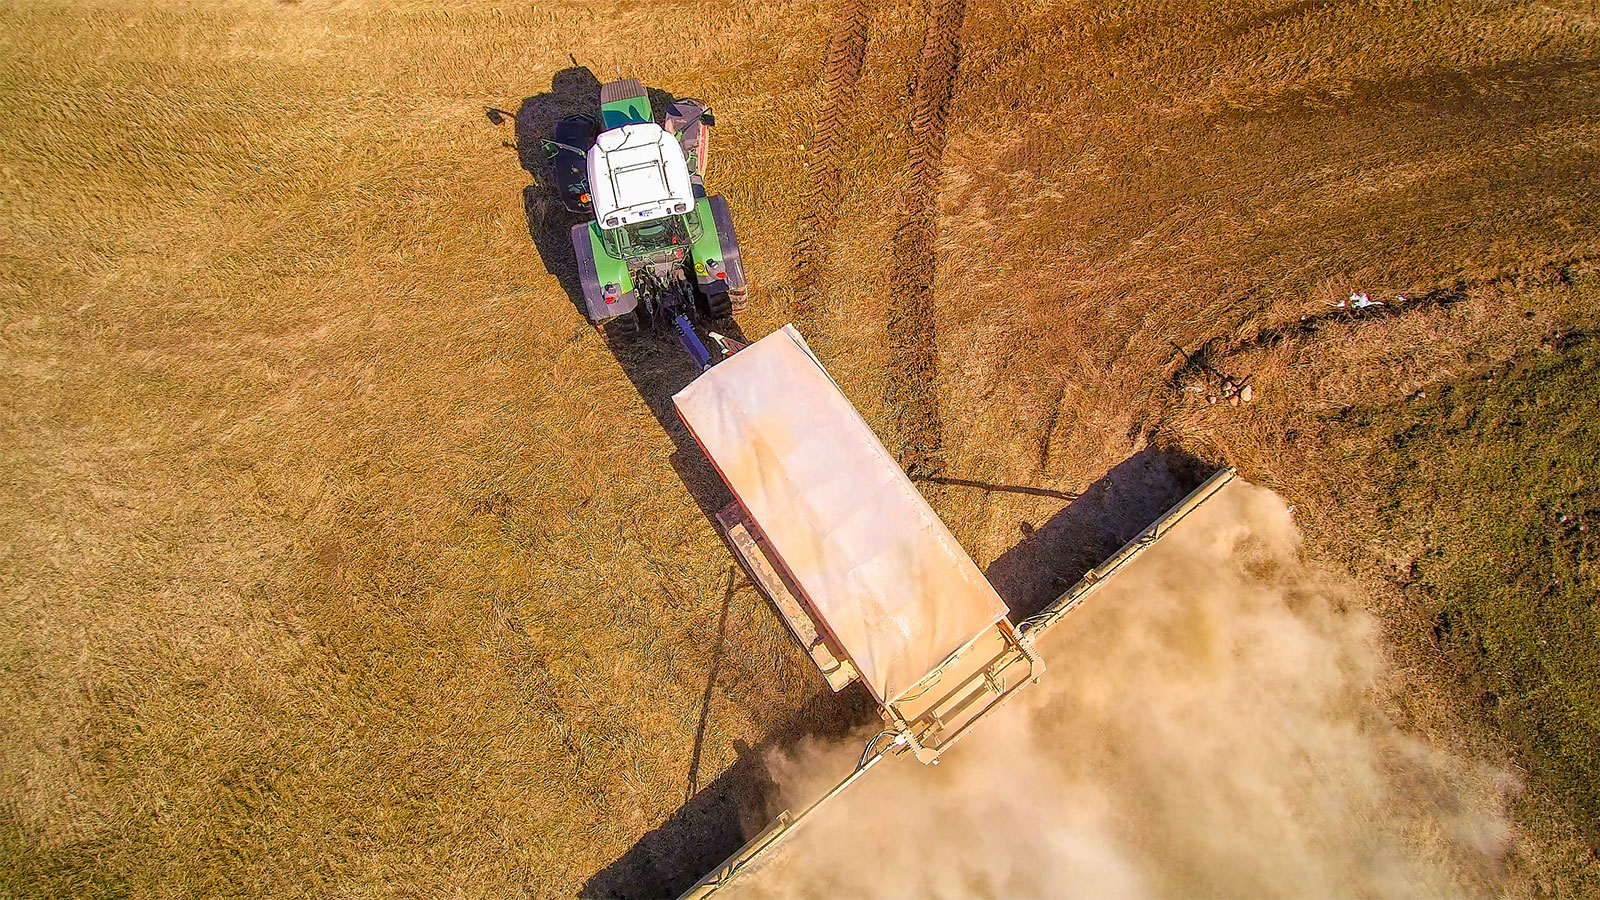 A green tractor spreading lime on a field